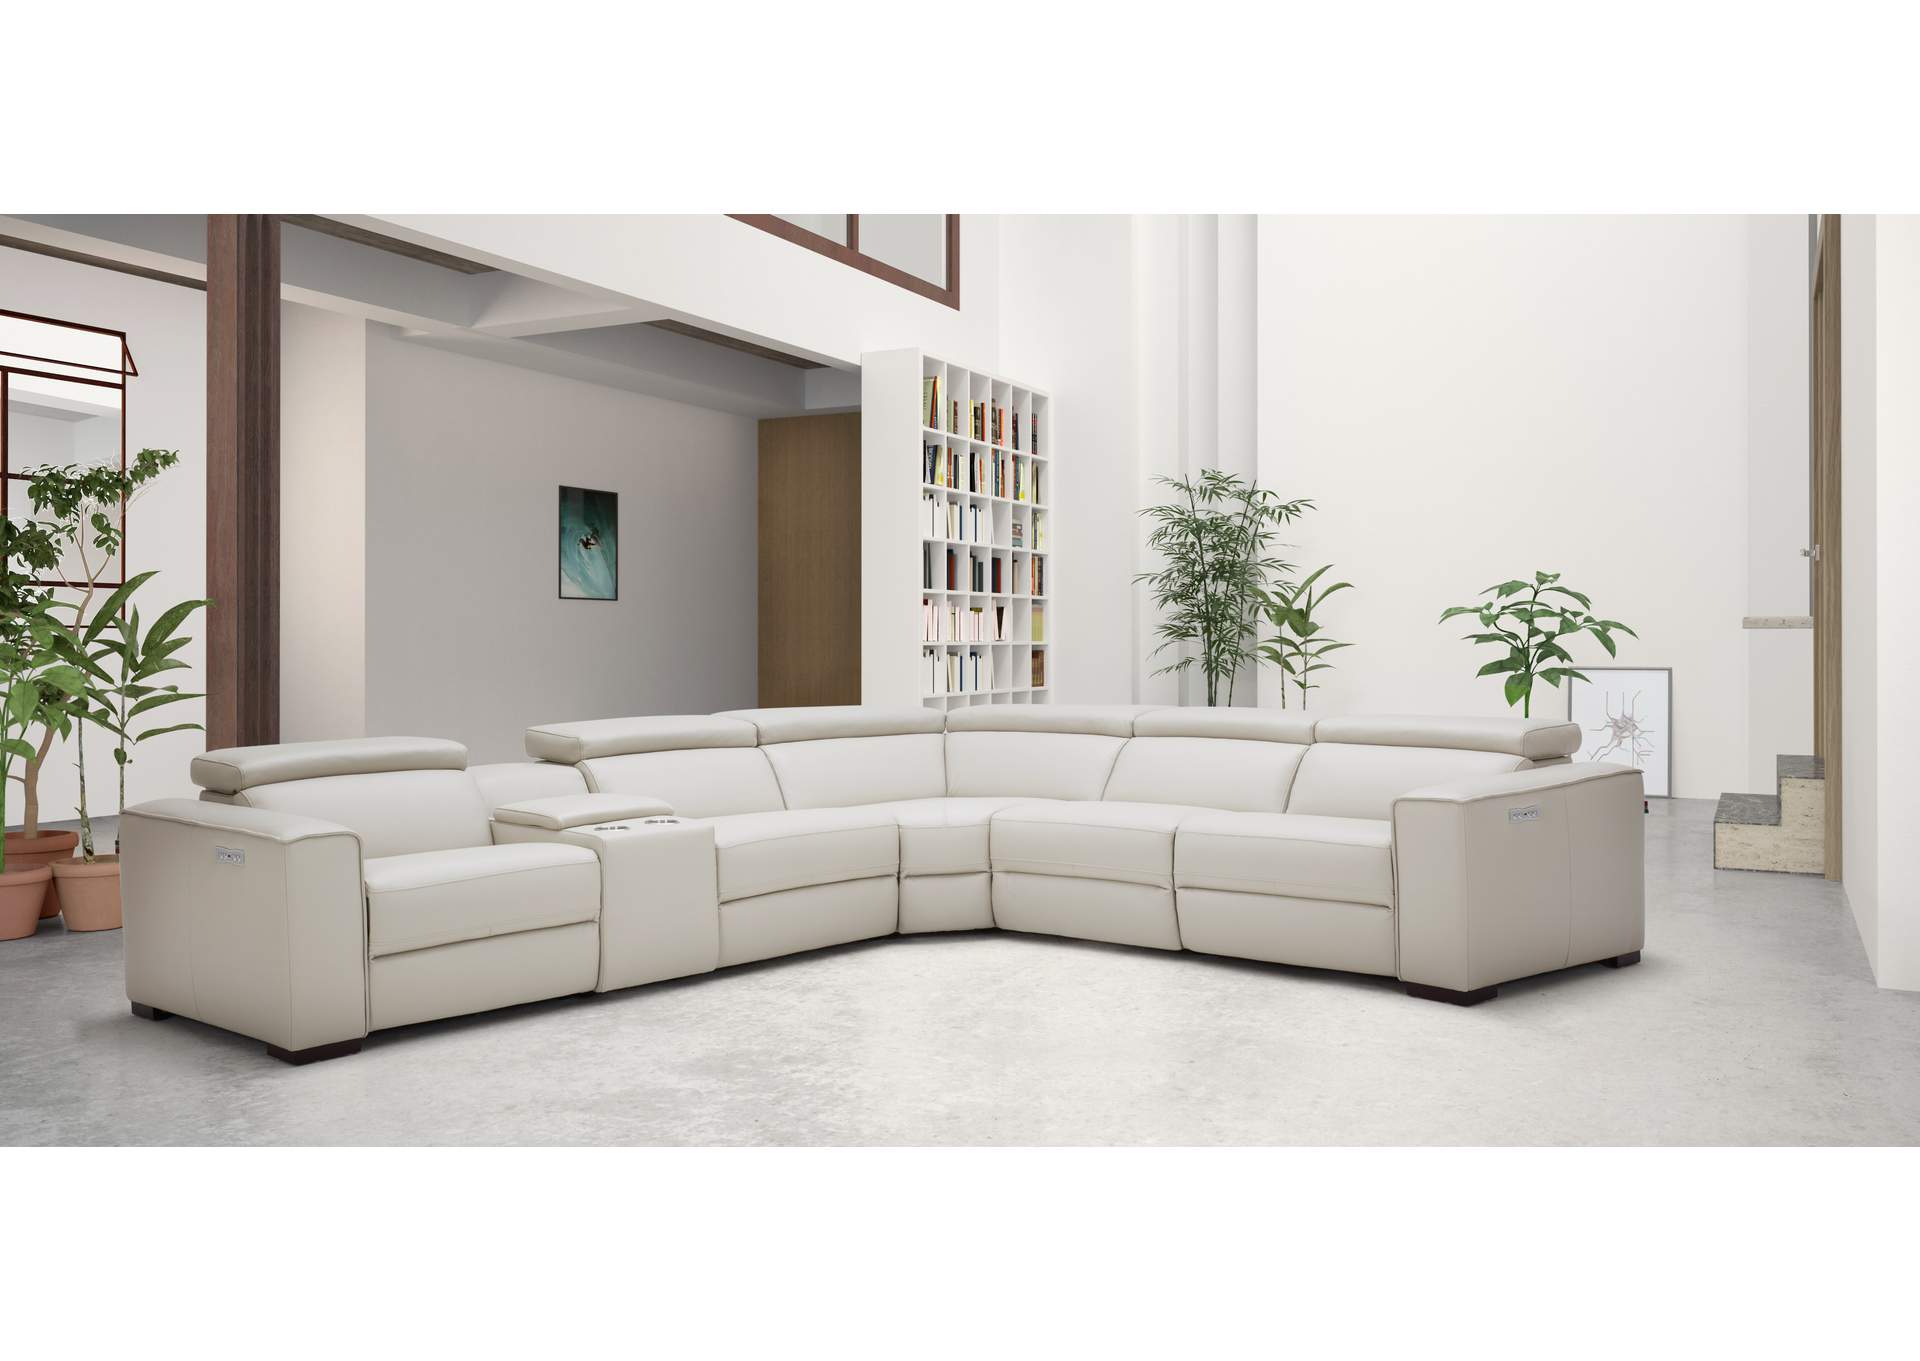 Picasso Motion Sectional In Silver Grey,J&M Furniture